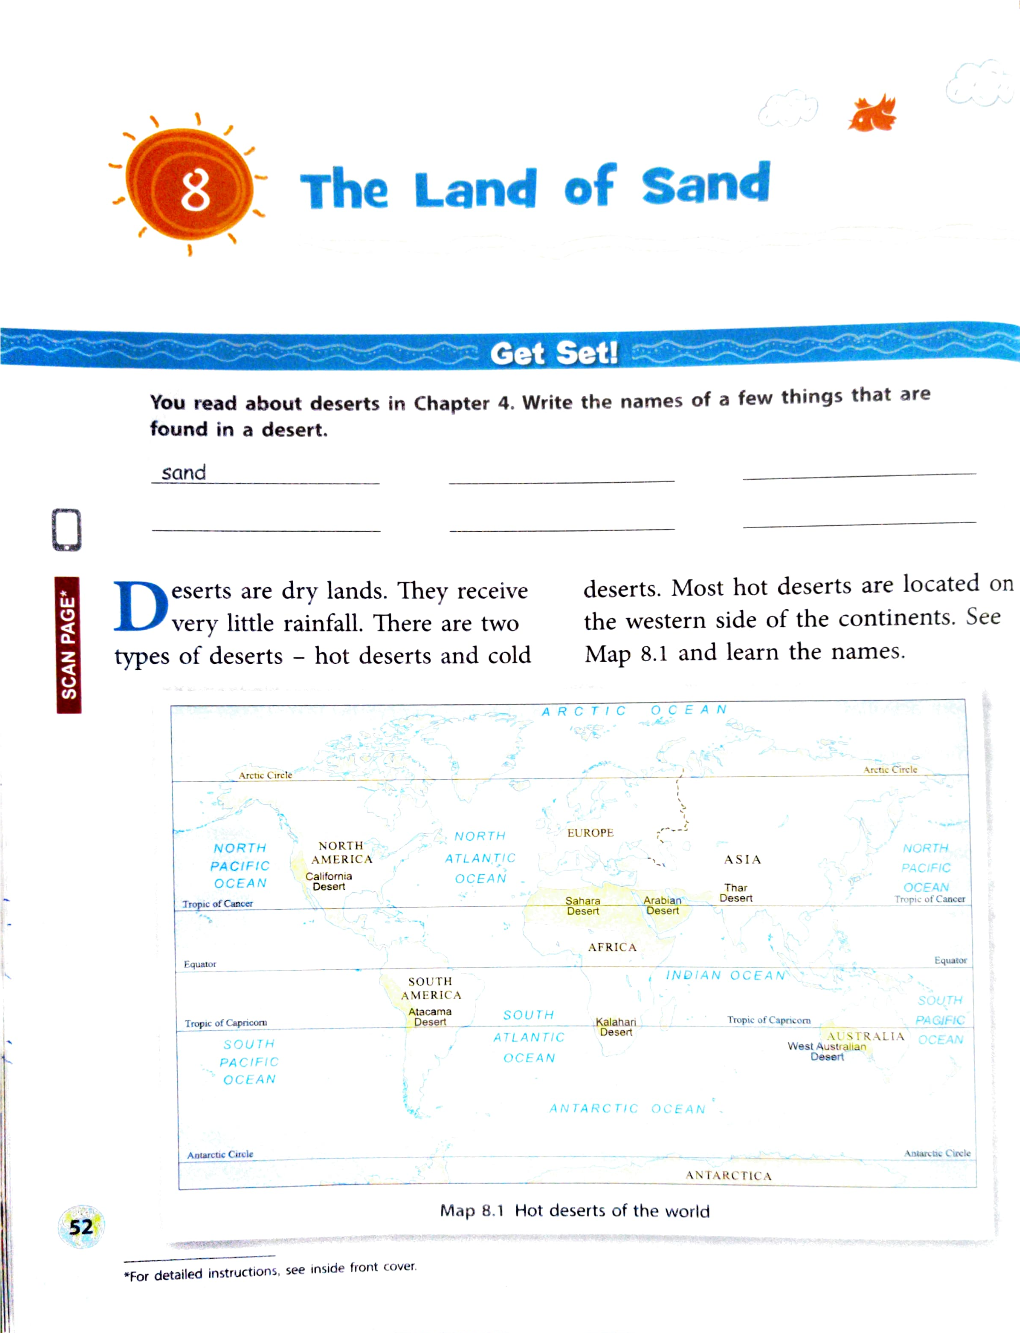 8The Land of Sand